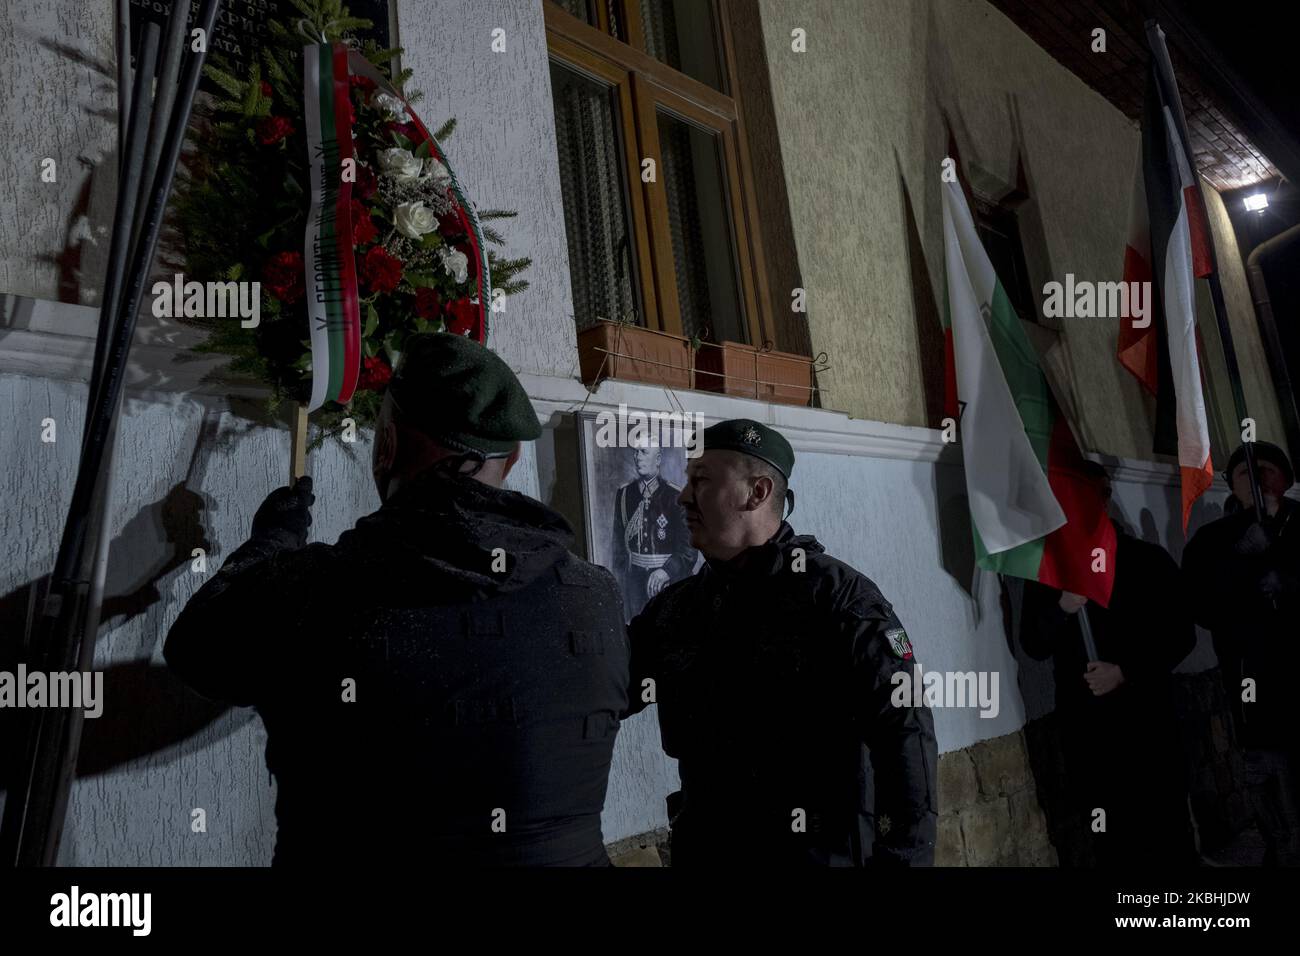 Nationalists honor Nazi-era general Hristo Lukov as they gather in front of his house, making speeches and leaving flowers. An annual Lukov March has been held every February since 2003. This year the march was banned by court order. The group which included participants from France, Germany and Hungary, was forced to scale back it's annual celebration in Sofia on February 22, 2020. (Photo by Jodi Hilton/NurPhoto) Stock Photo